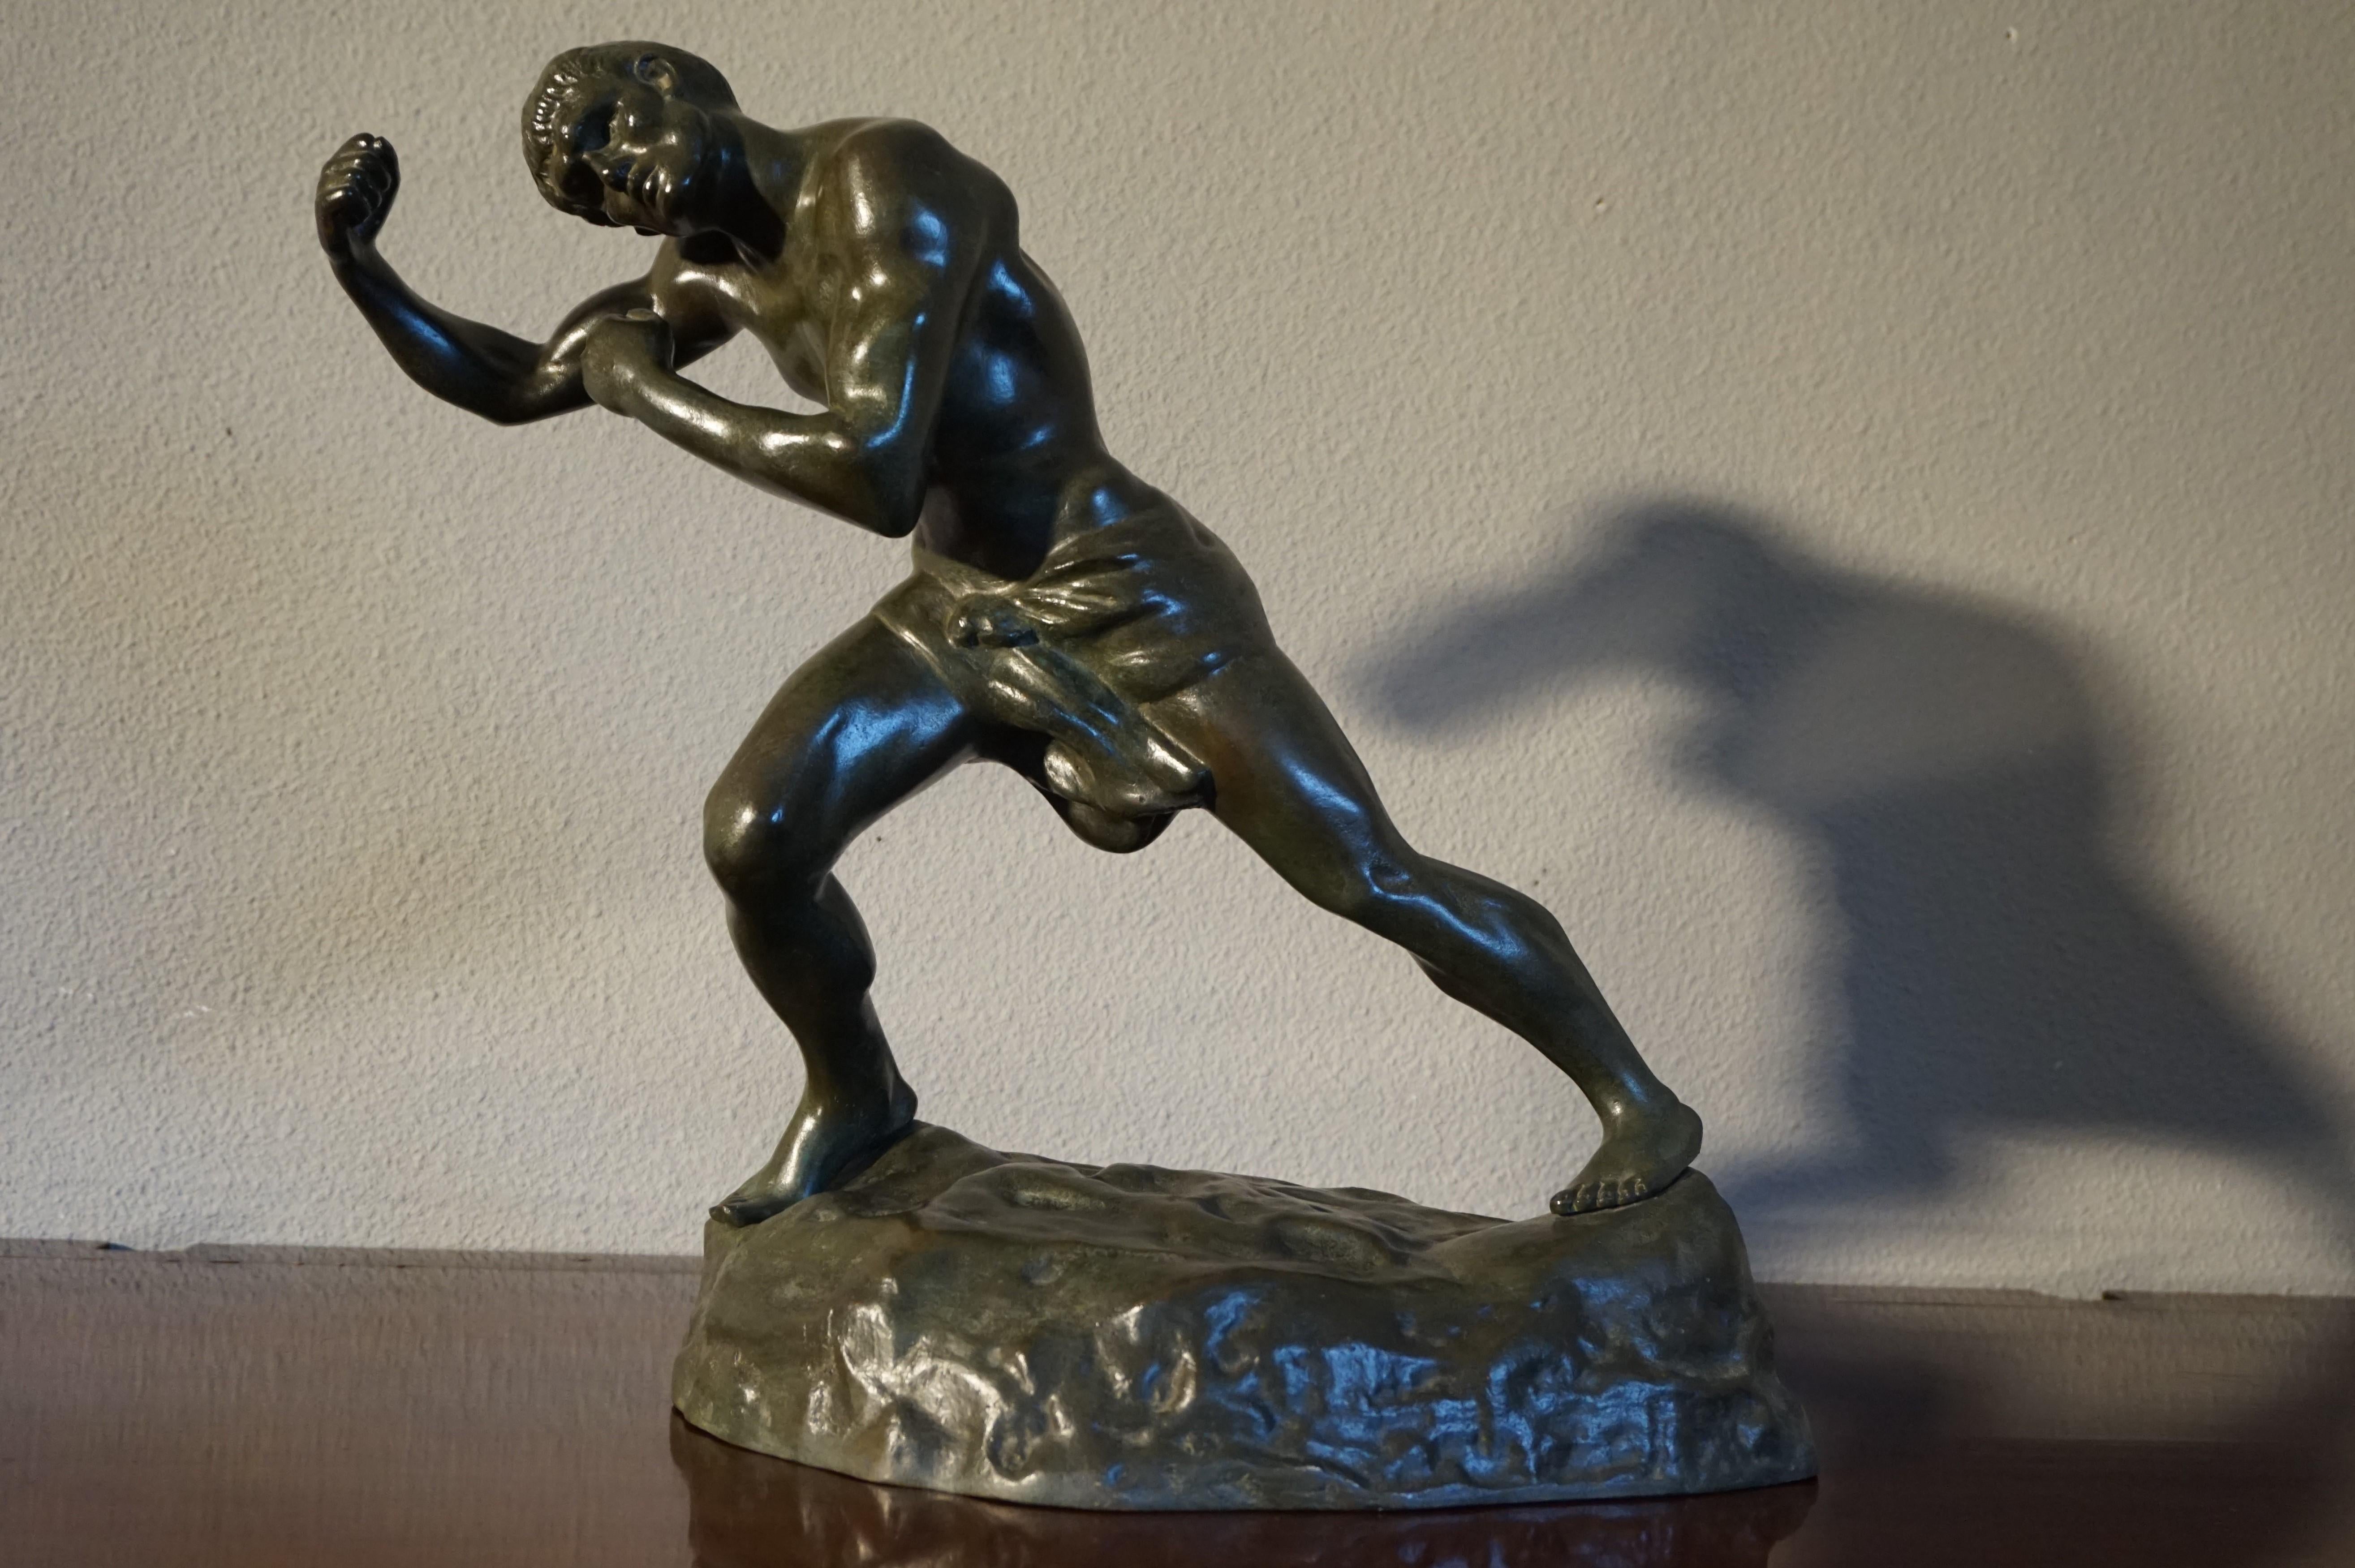 Mint Condition Heavy Bronze Boxer / Price Fighter Sculpture by Jef Lambeaux For Sale 5